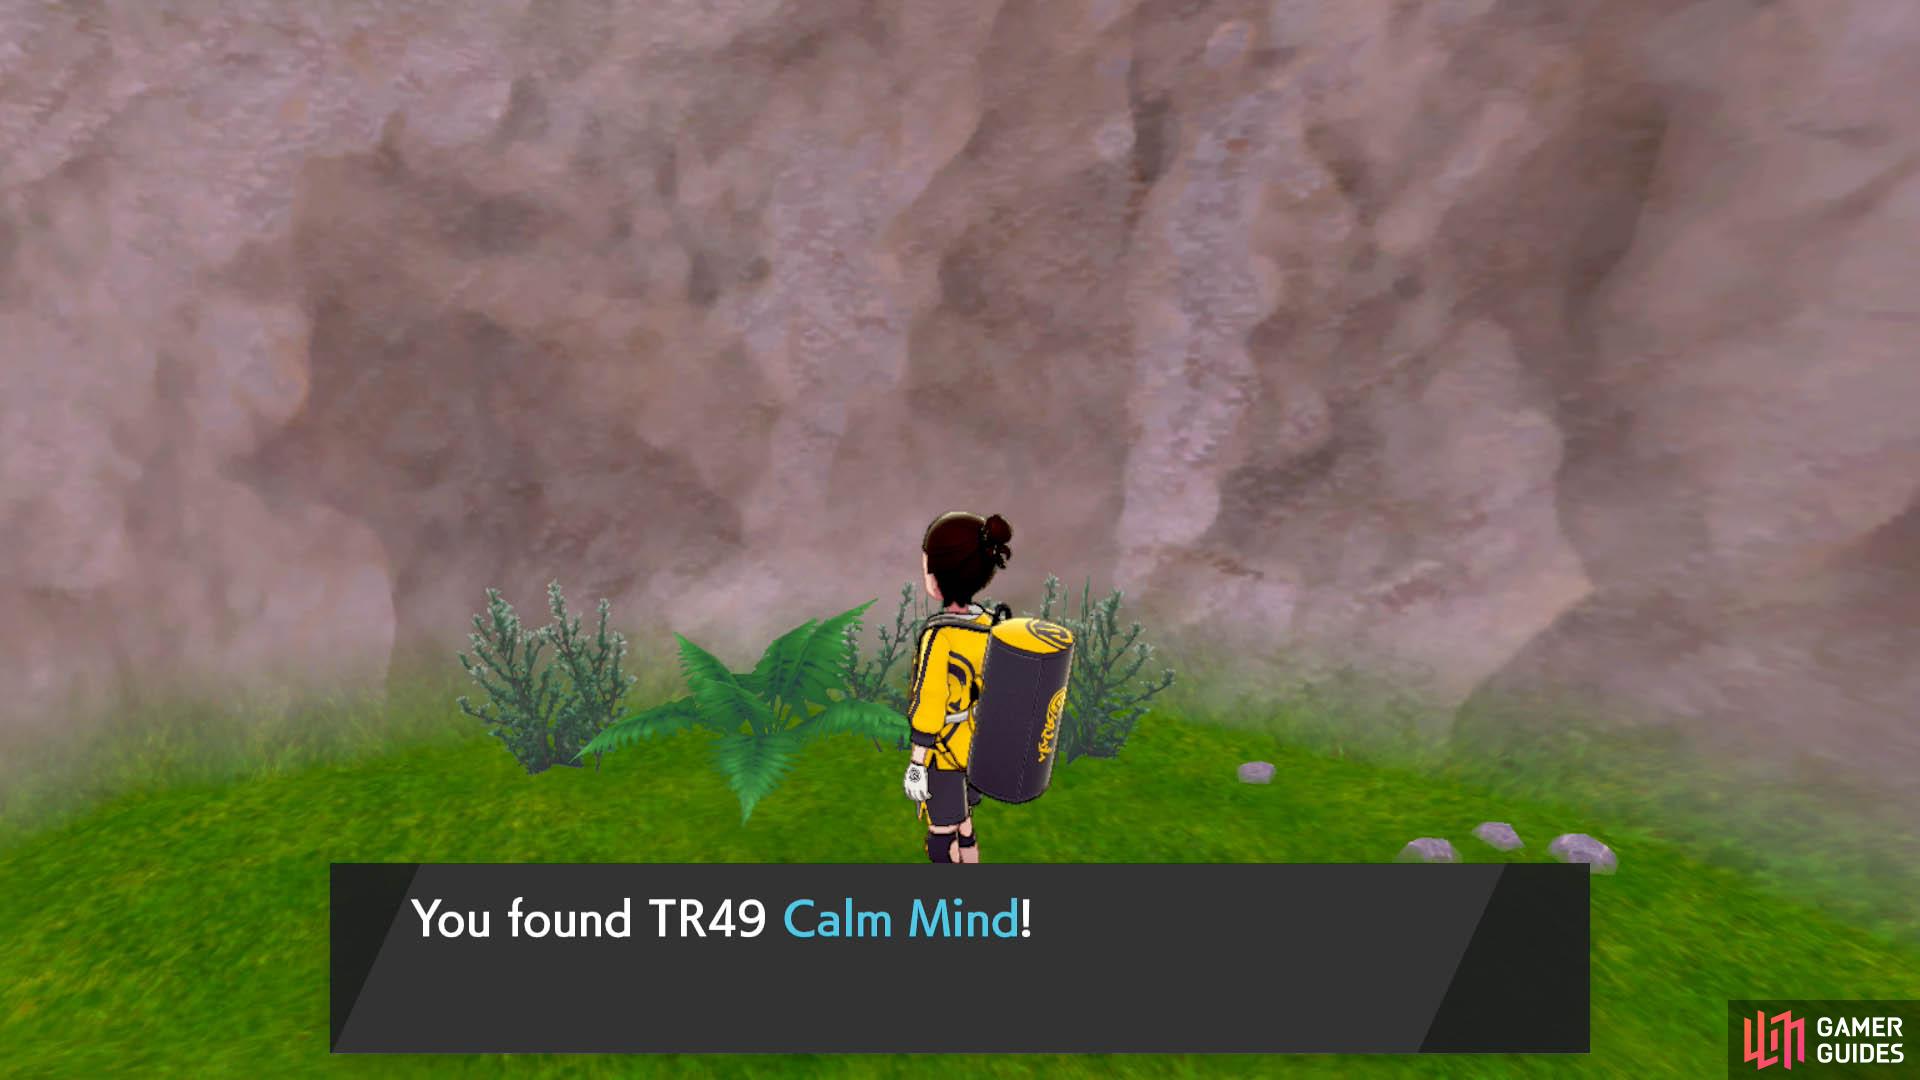 Calm Mind is a potent status move that boosts the user's Special Attack and Defense stats.